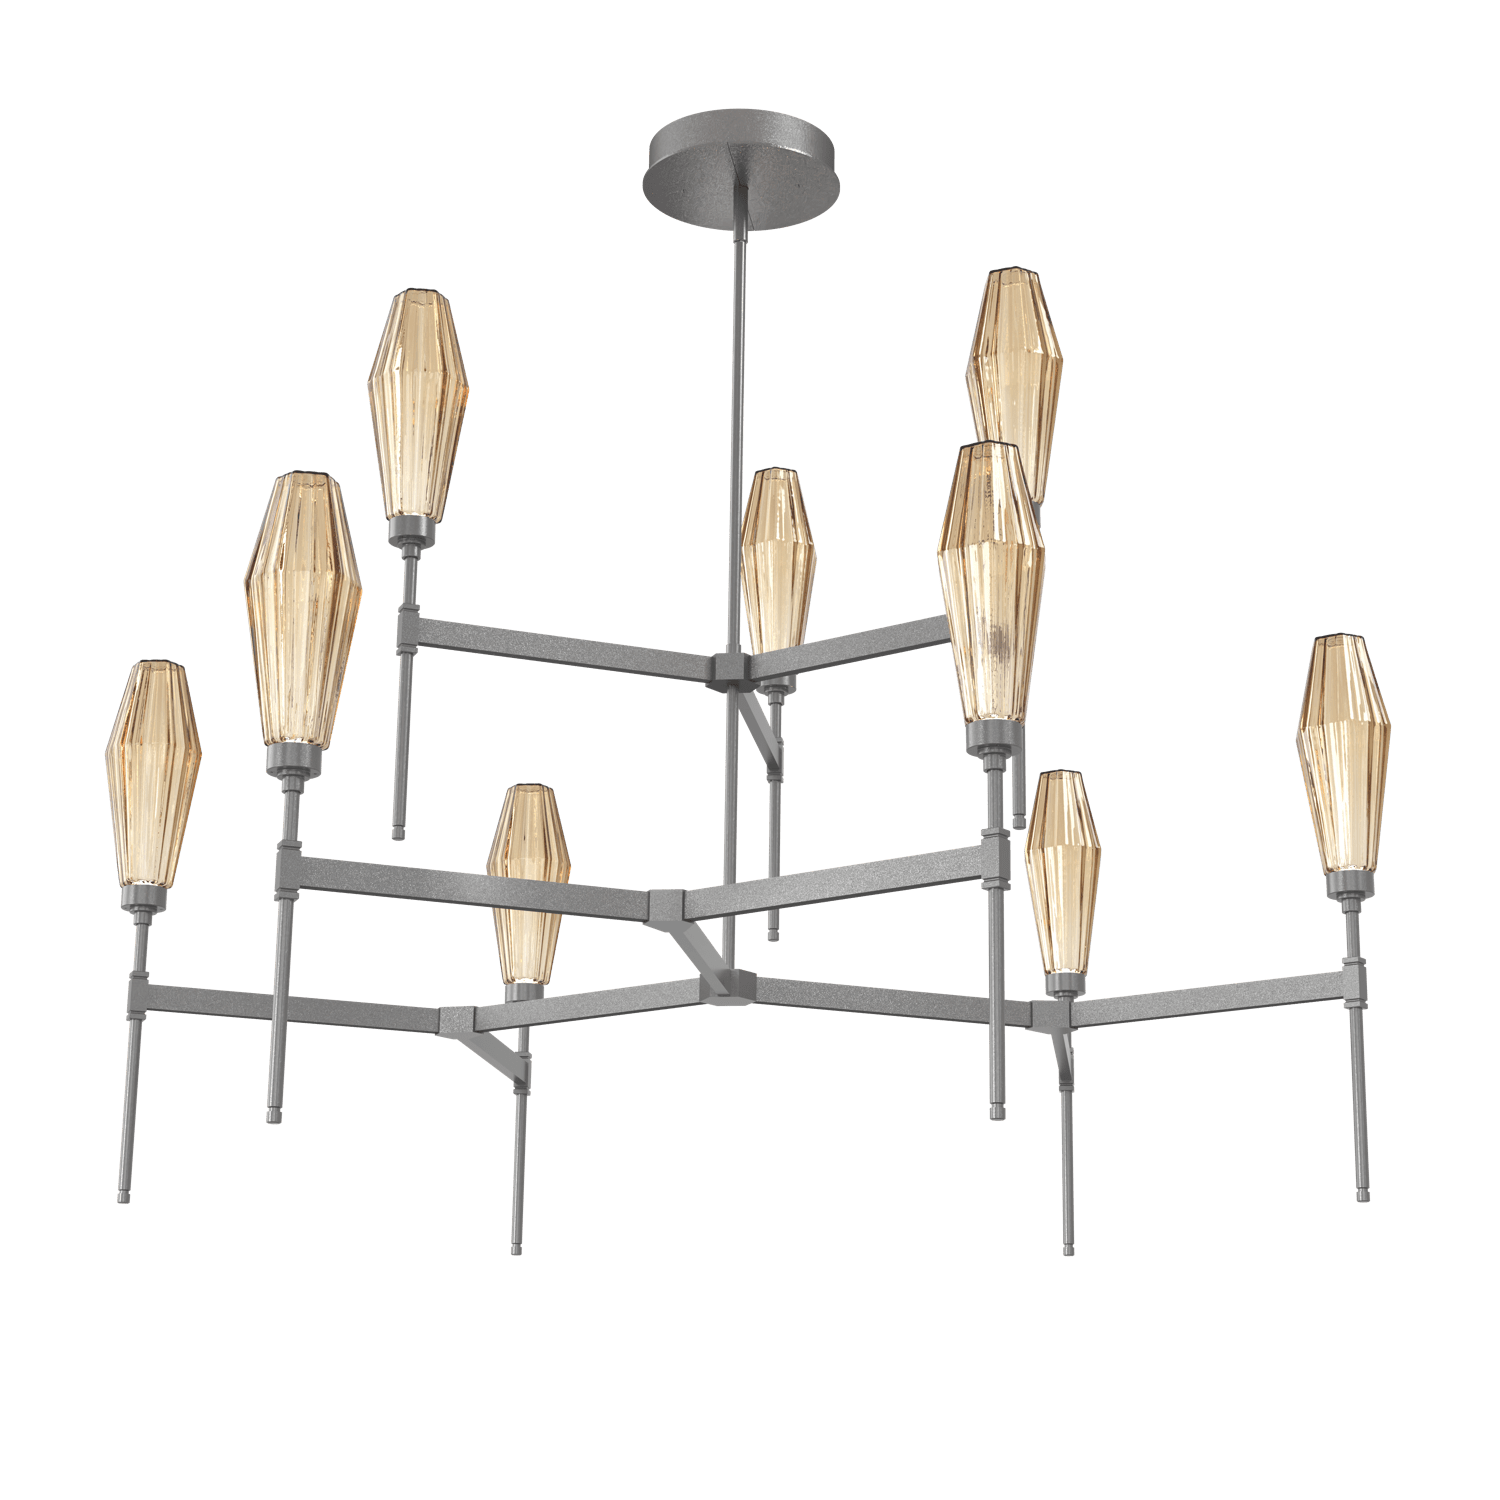 CHB0049-54-GP-RB-Hammerton-Studio-Aalto-54-inch-round-two-tier-belvedere-chandelier-with-graphite-finish-and-optic-ribbed-bronze-glass-shades-and-LED-lamping